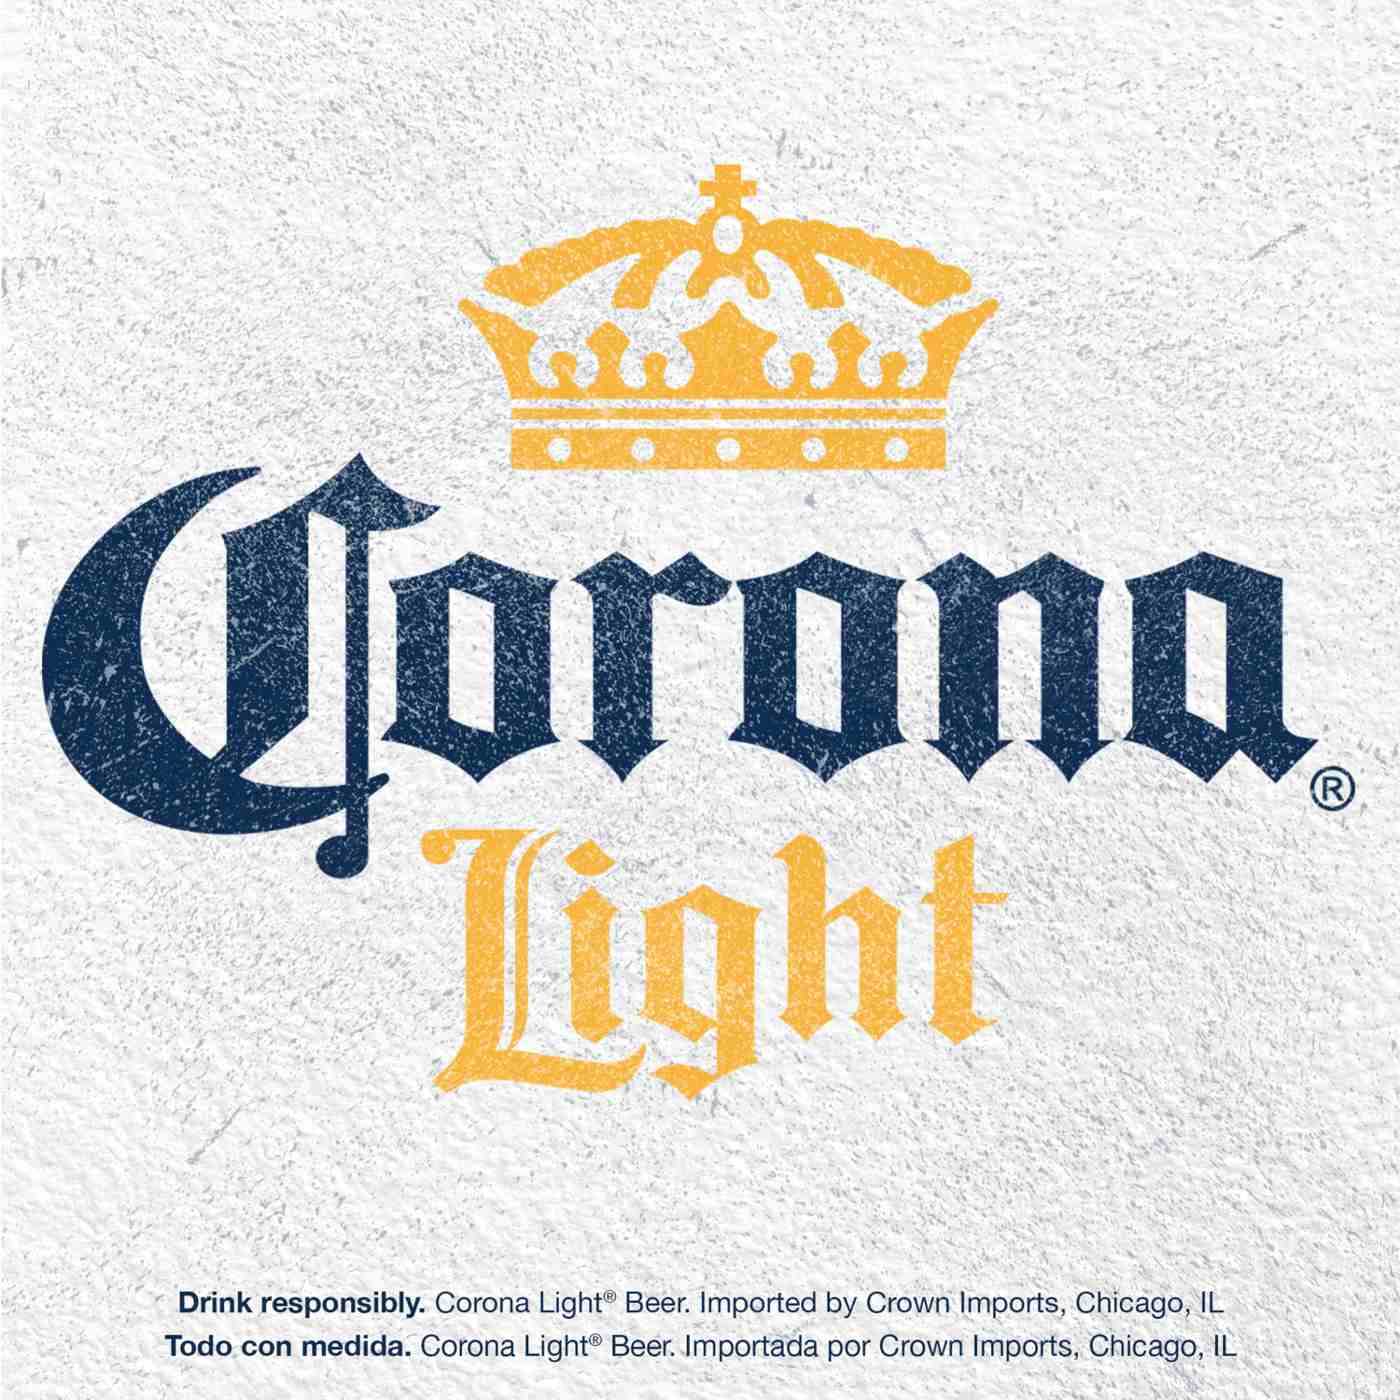 Corona Light Mexican Lager Import Light Beer 12 oz Cans, 12 pk; image 9 of 10